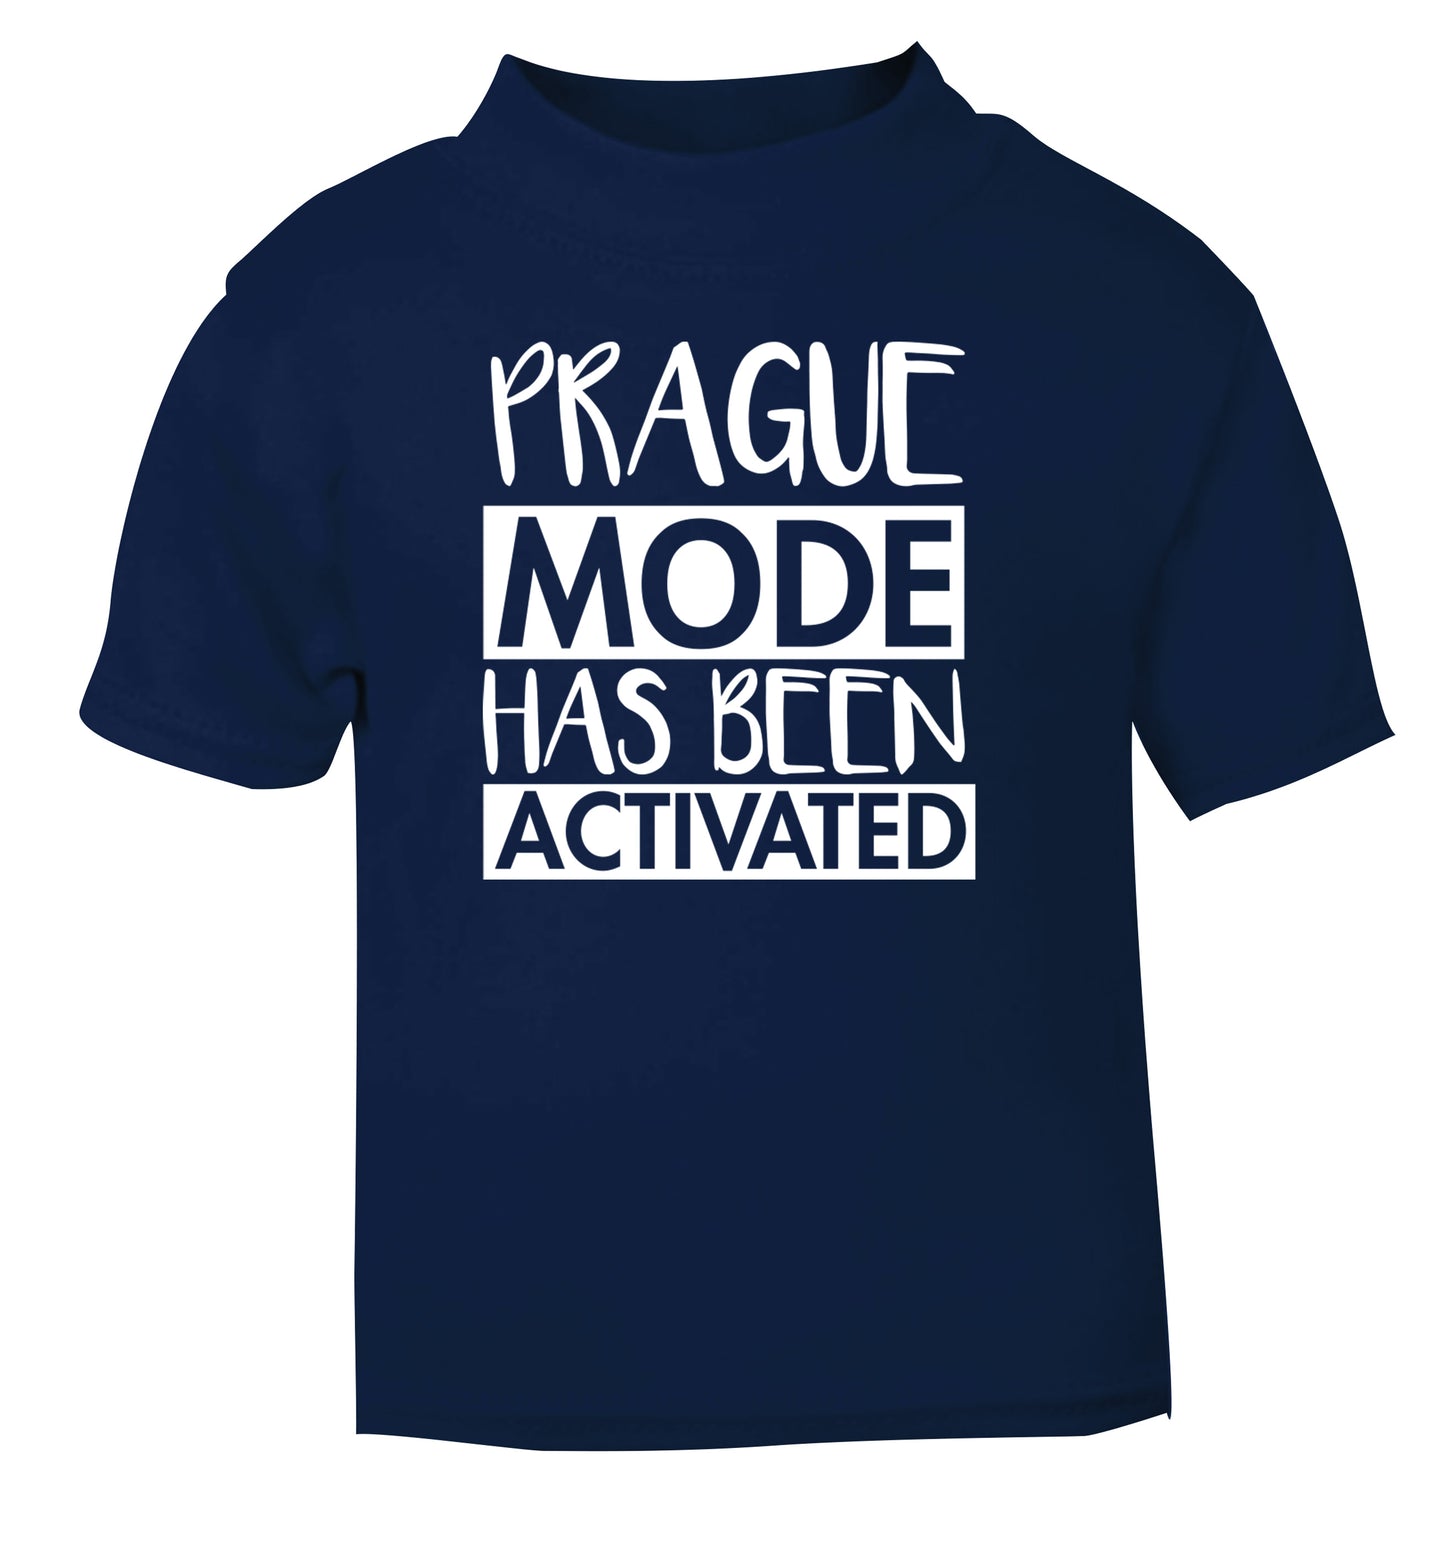 Prague mode has been activated navy Baby Toddler Tshirt 2 Years